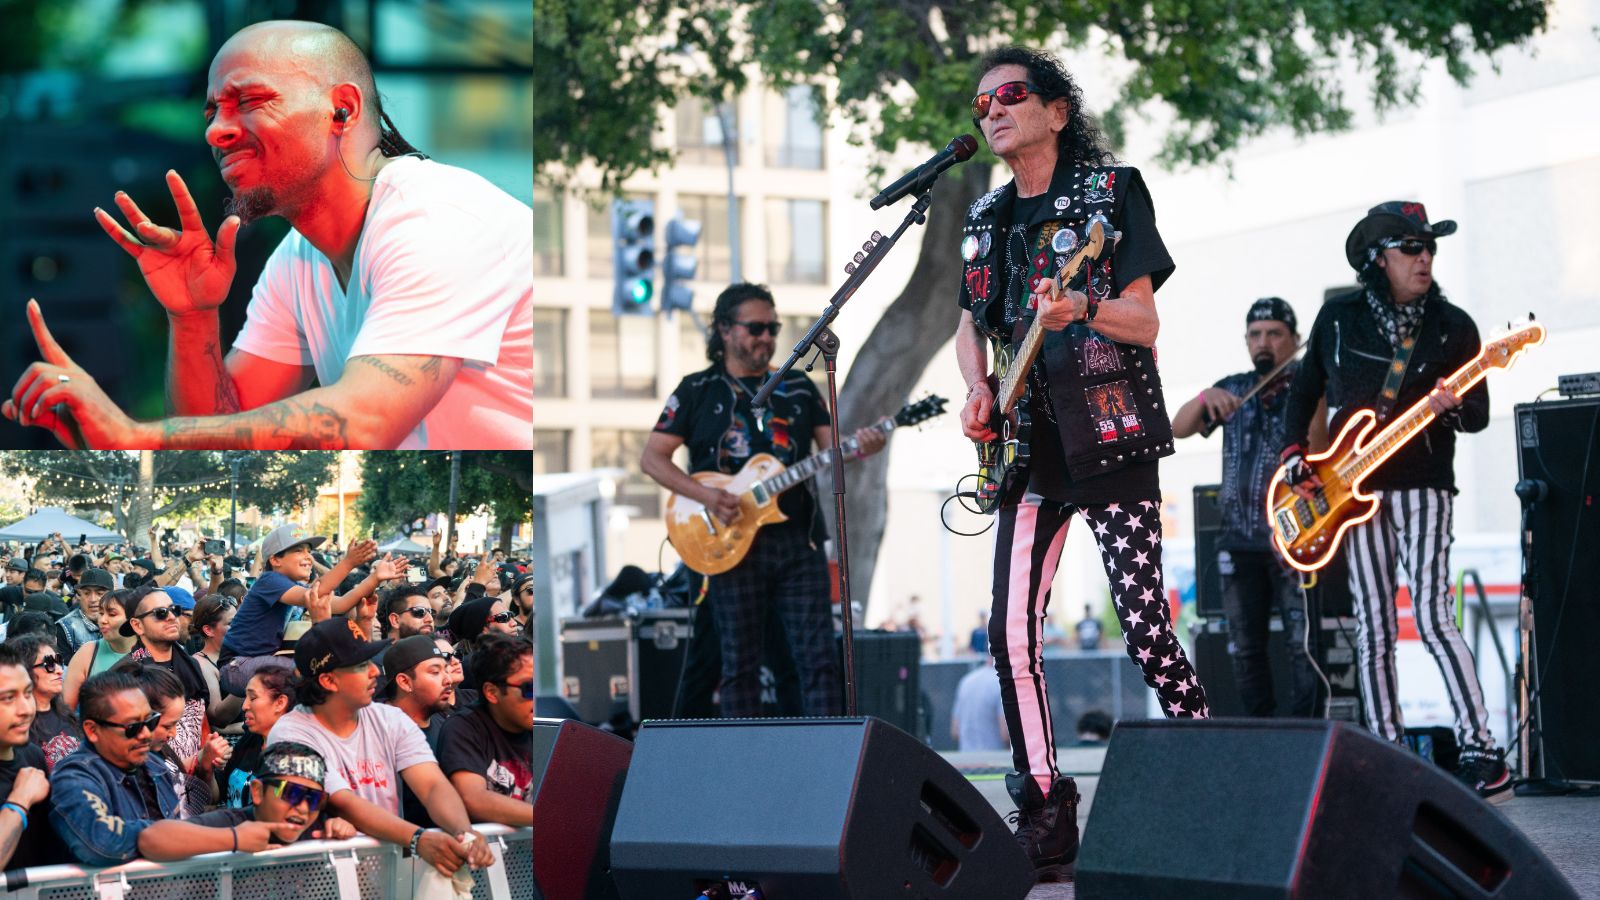 A Historic Moment for Accessibility Comcast Partners with Mexican Rock Band EL TRI to Provide ASL Interpreters for the First Time at Music in the Park in San Jose